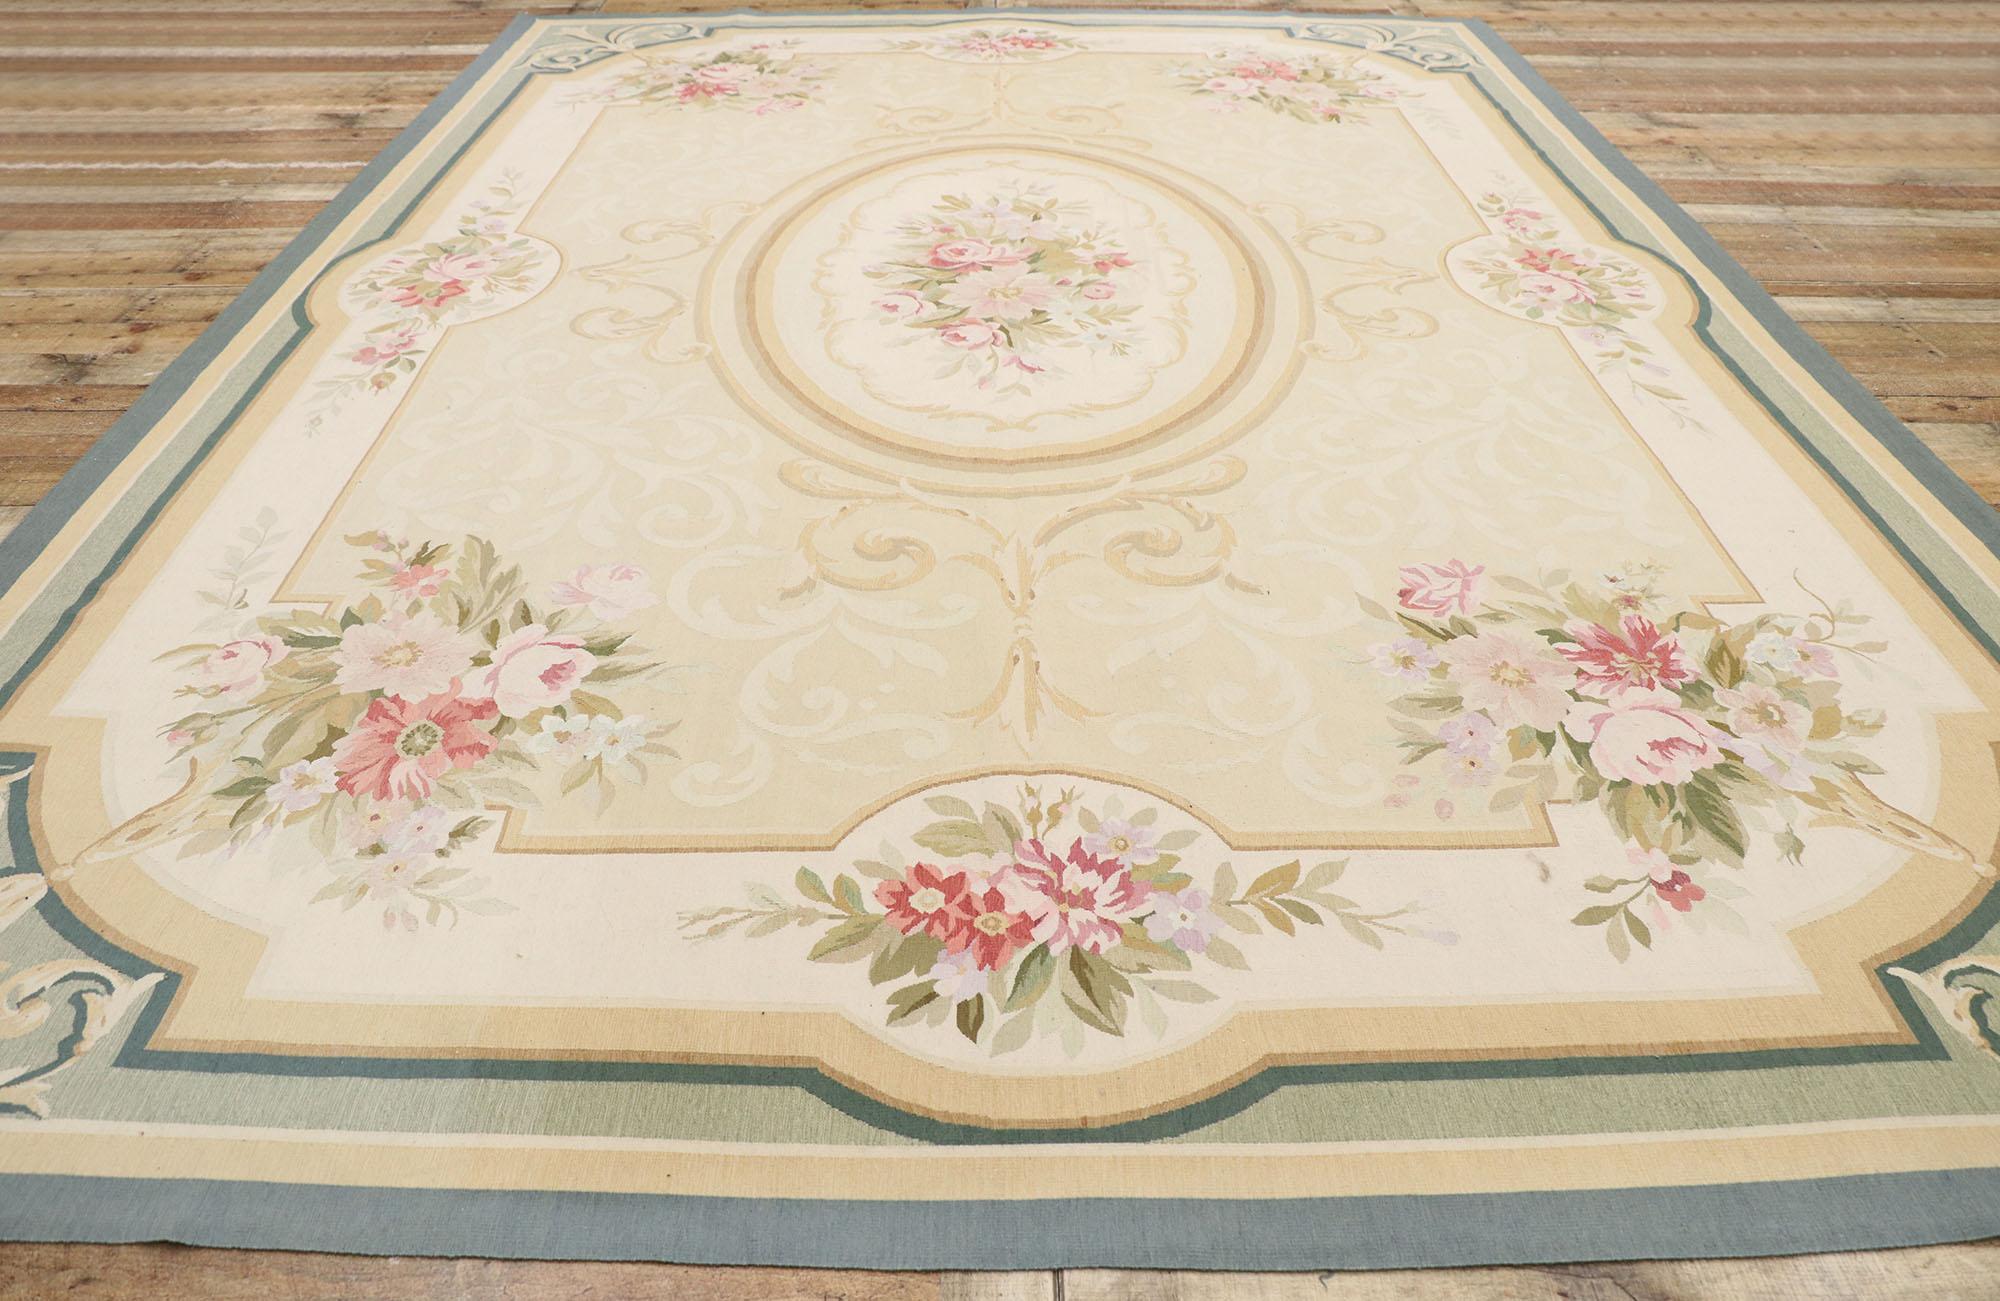 Vintage French Aubusson Rug with Regal Romantic Rococo Style In Good Condition For Sale In Dallas, TX